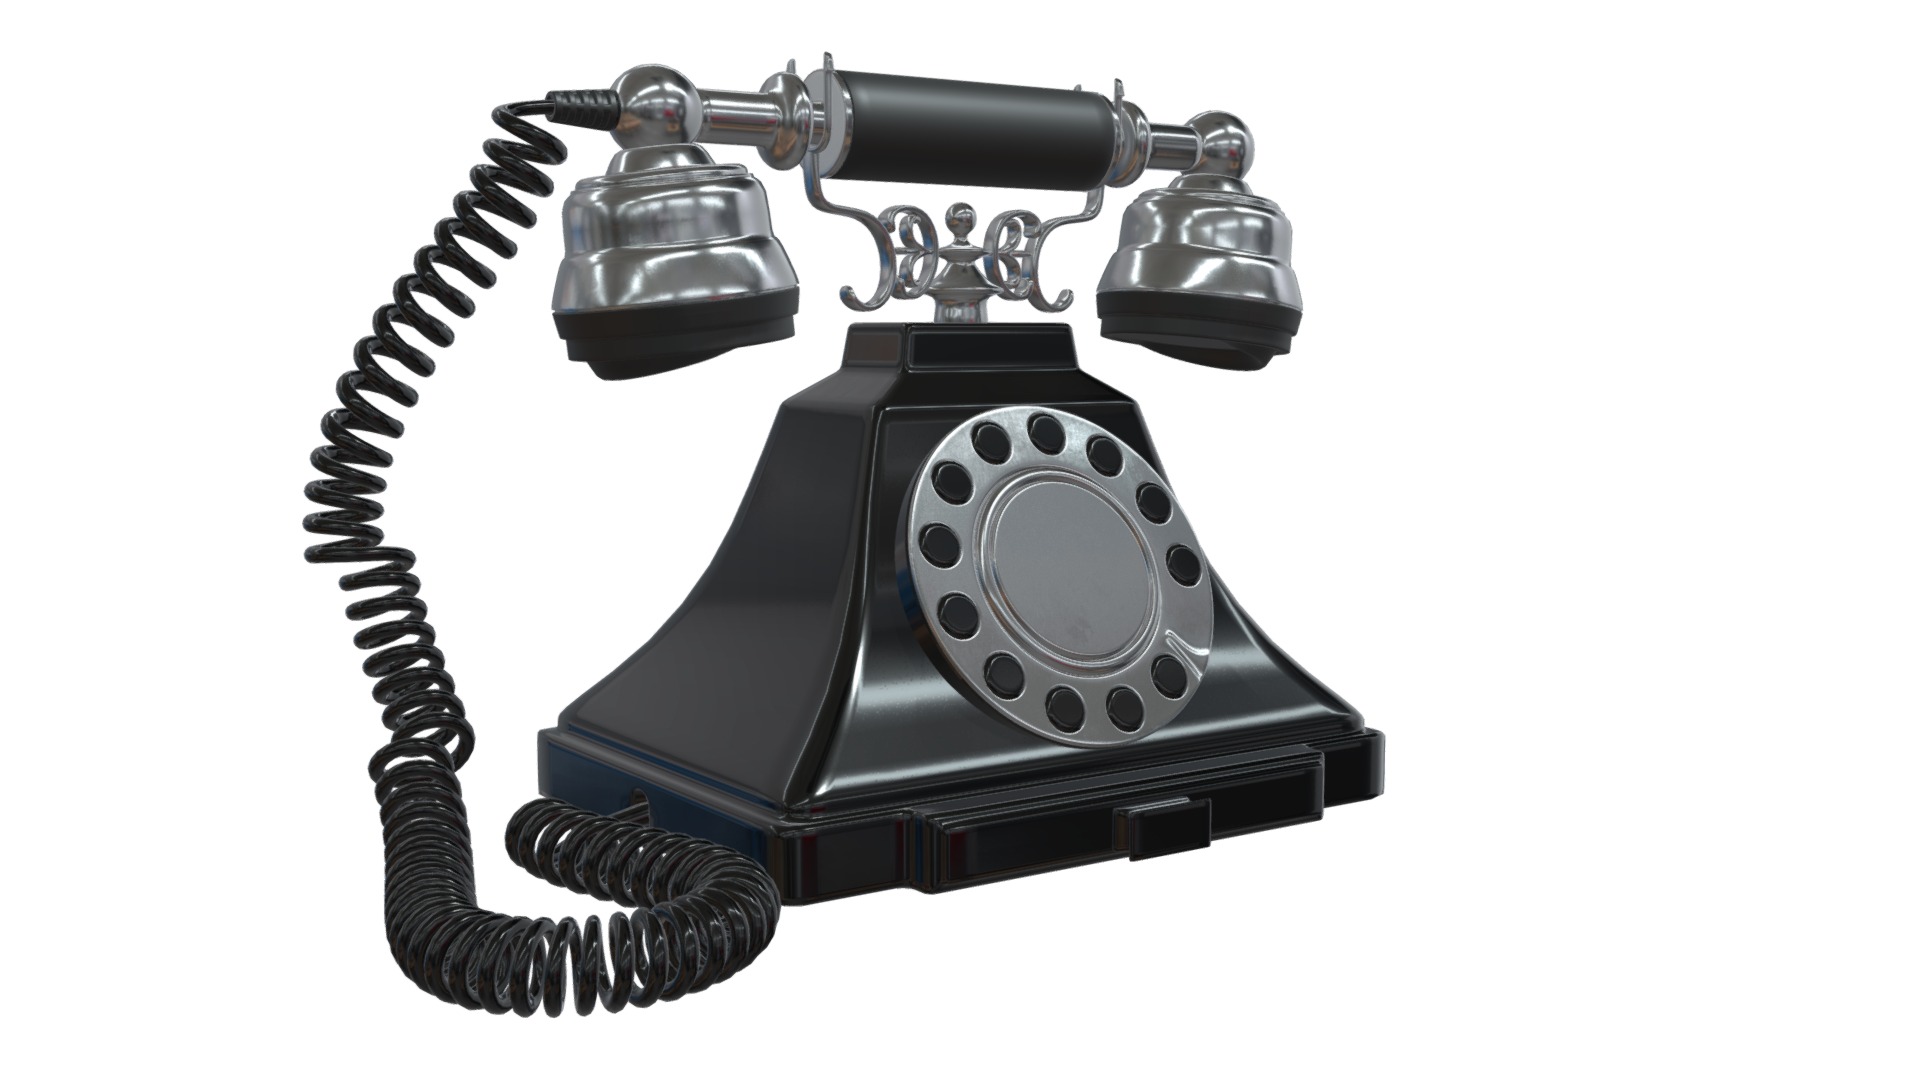 3D model Vintage old classic rotary phone - This is a 3D model of the Vintage old classic rotary phone. The 3D model is about a black and silver camera.